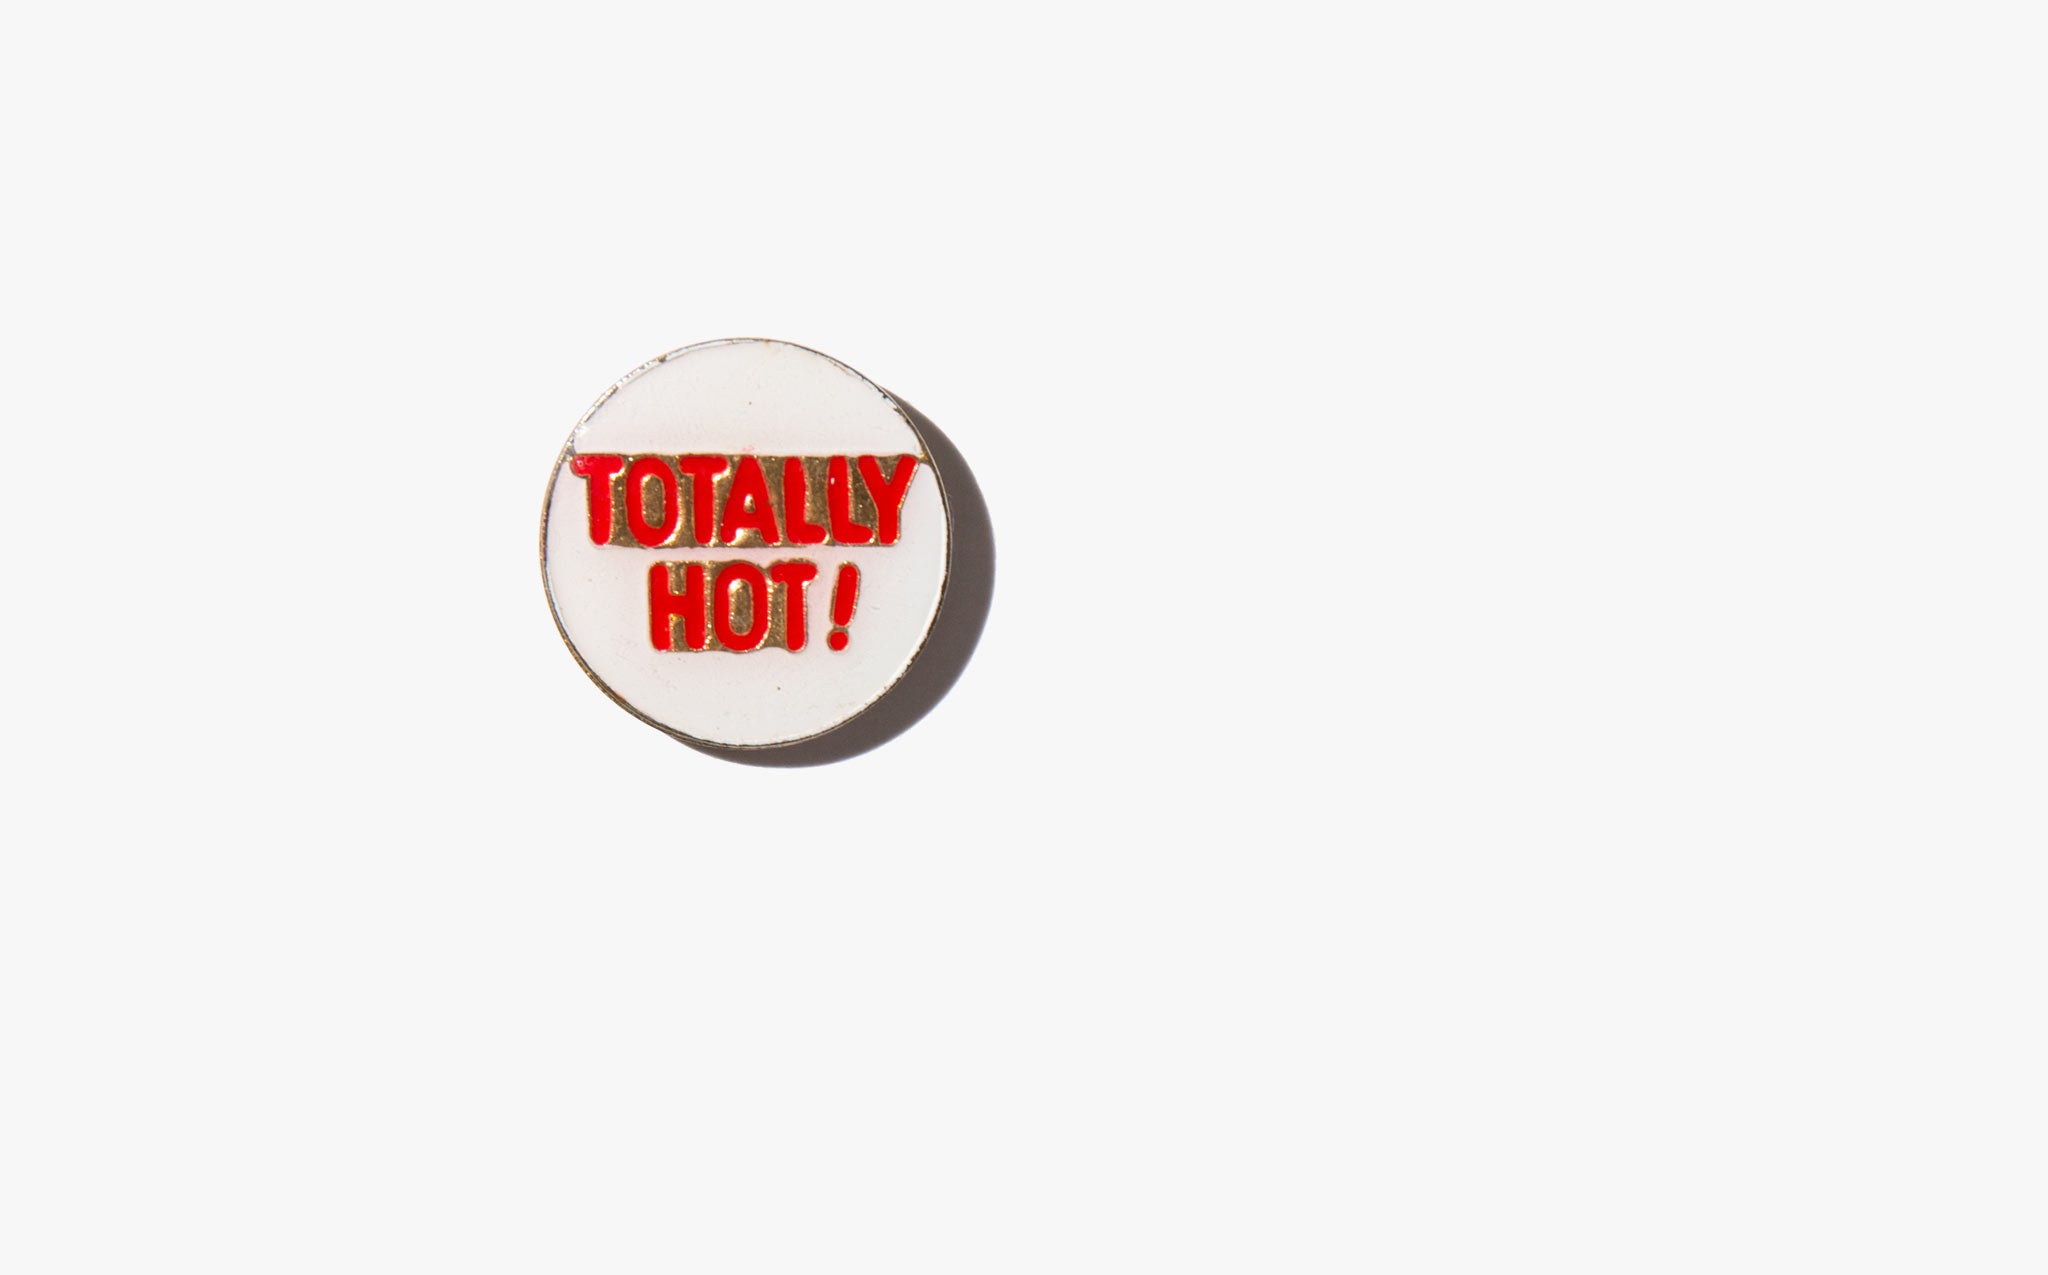 Totally Hot Vintage Pin